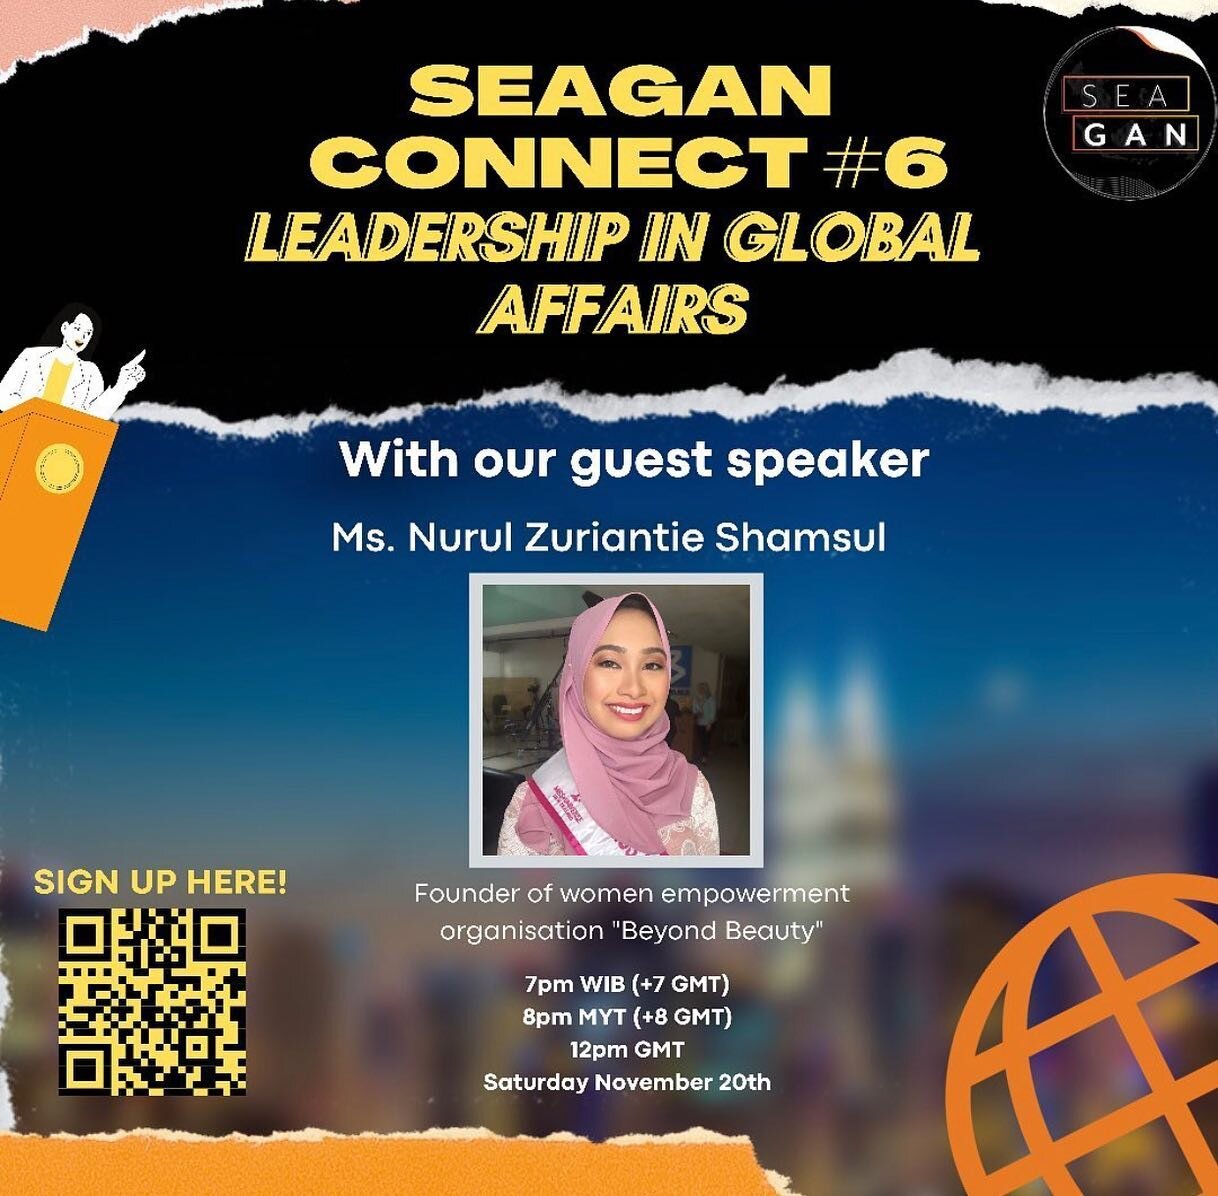 Super excited to be a guest speaker on leadership with @seaglobalaffairs for next week&rsquo;s event. ✨